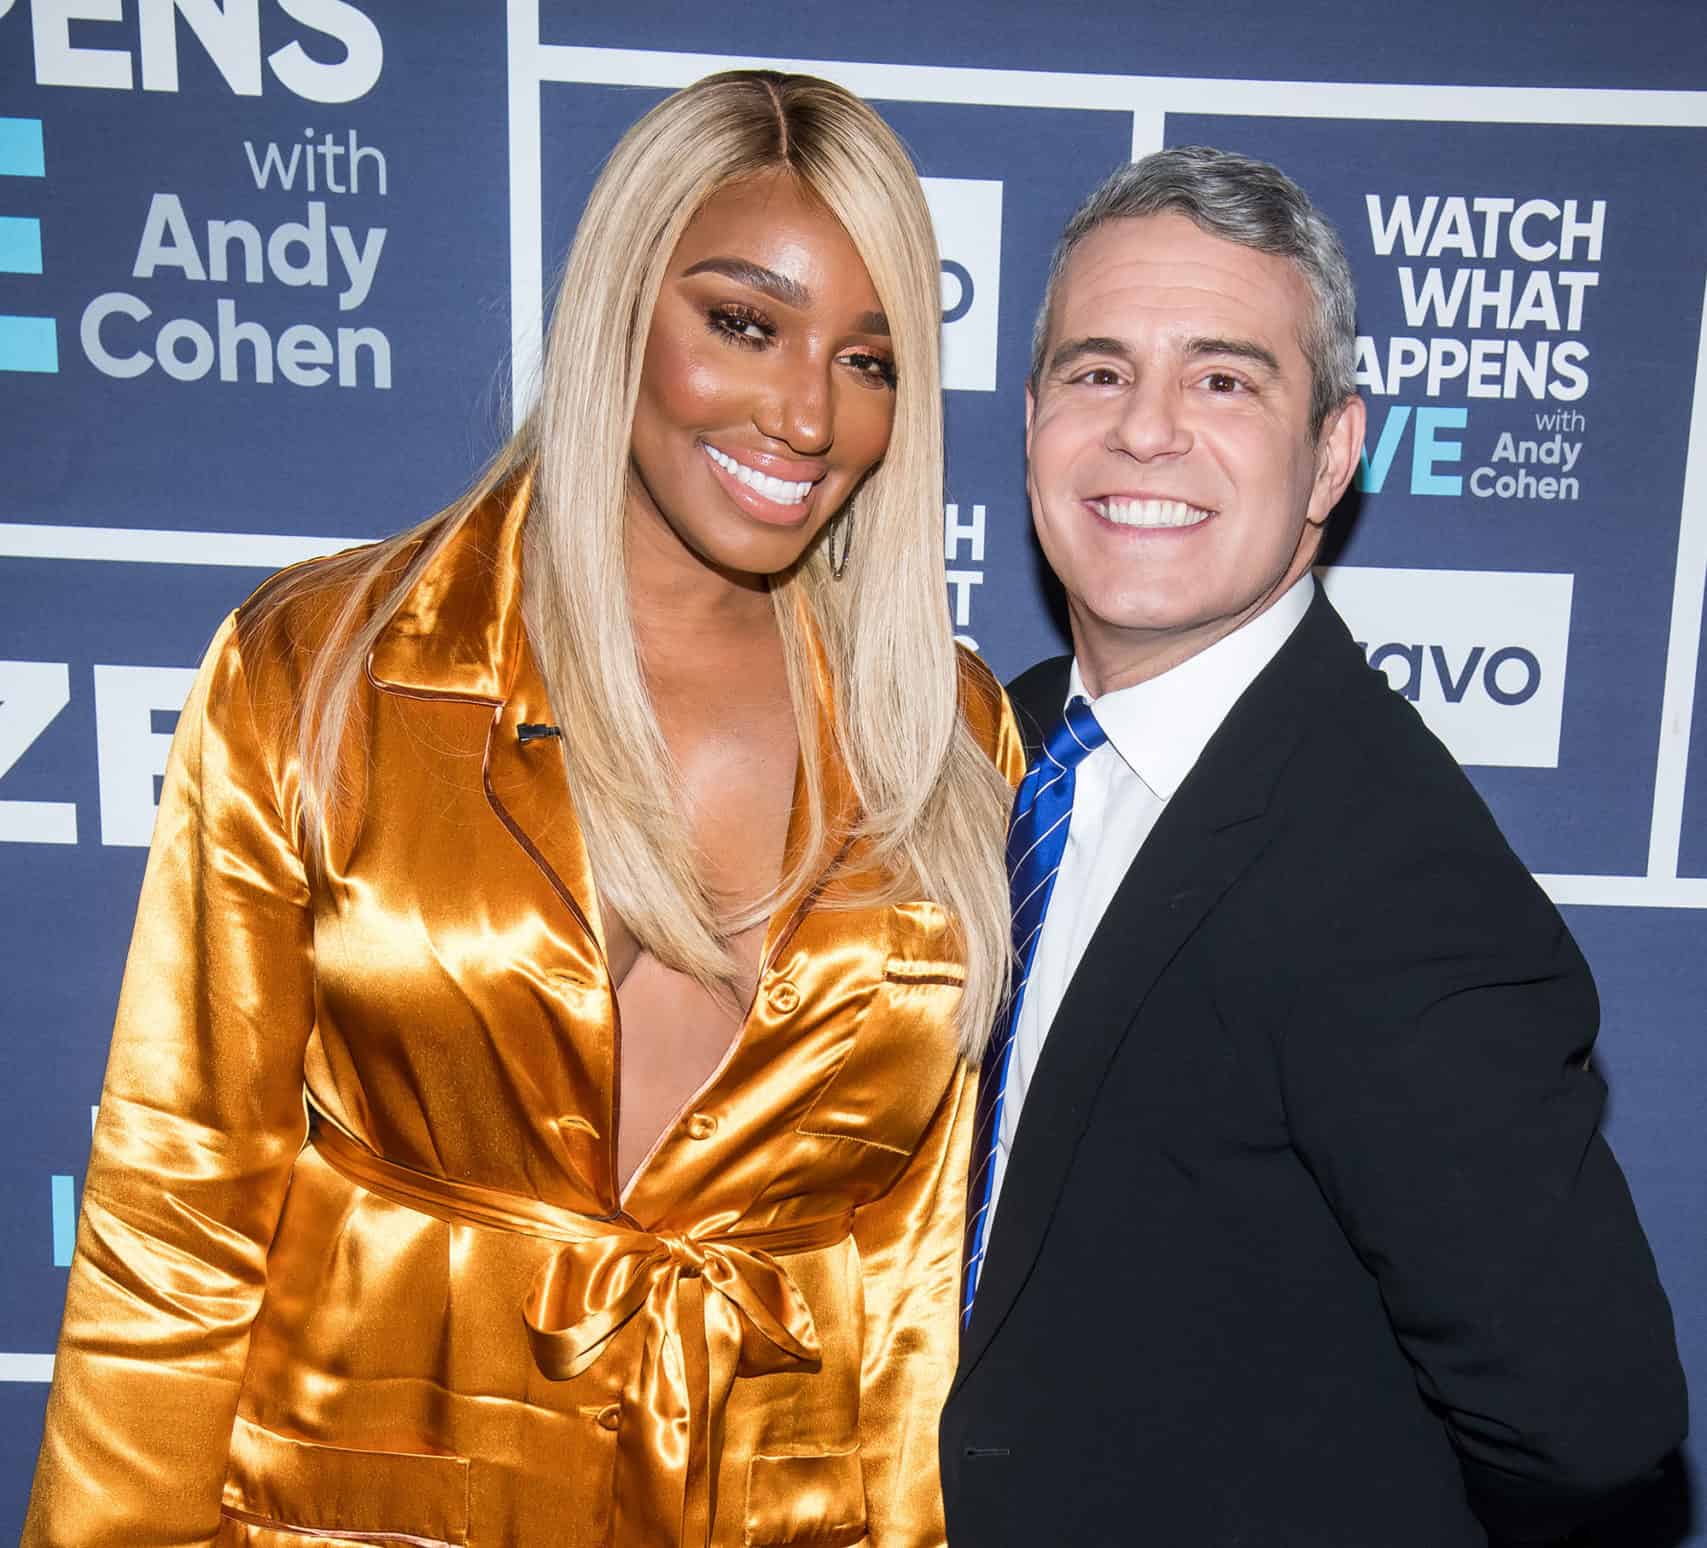 Andy Cohen says he's focused on the upcoming season after asked his thoughts about Nene Leakes returning to RHOA.